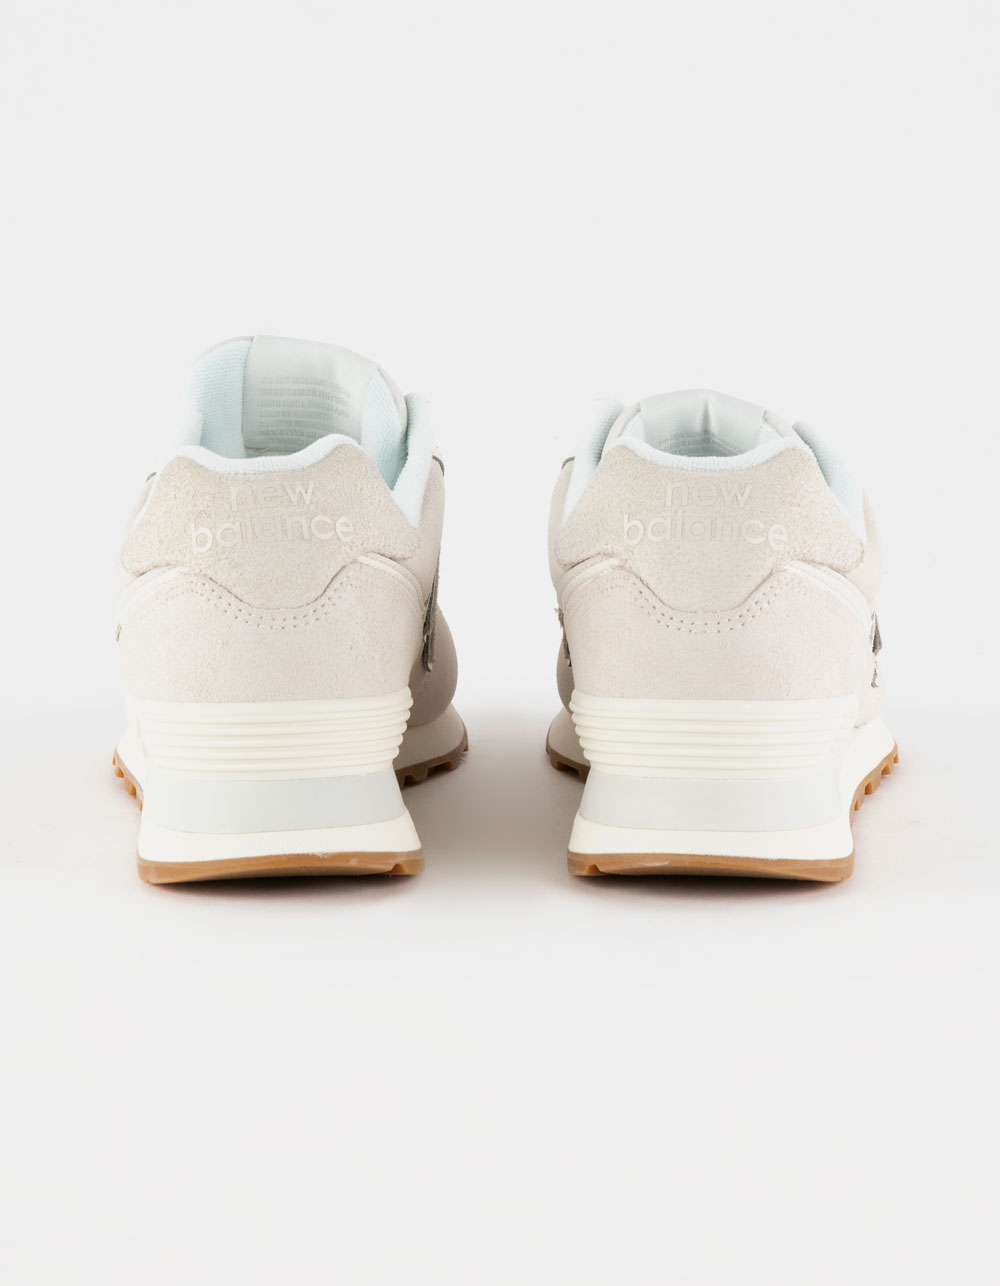 NEW BALANCE 574 Womens Shoes - WHITE | Tillys